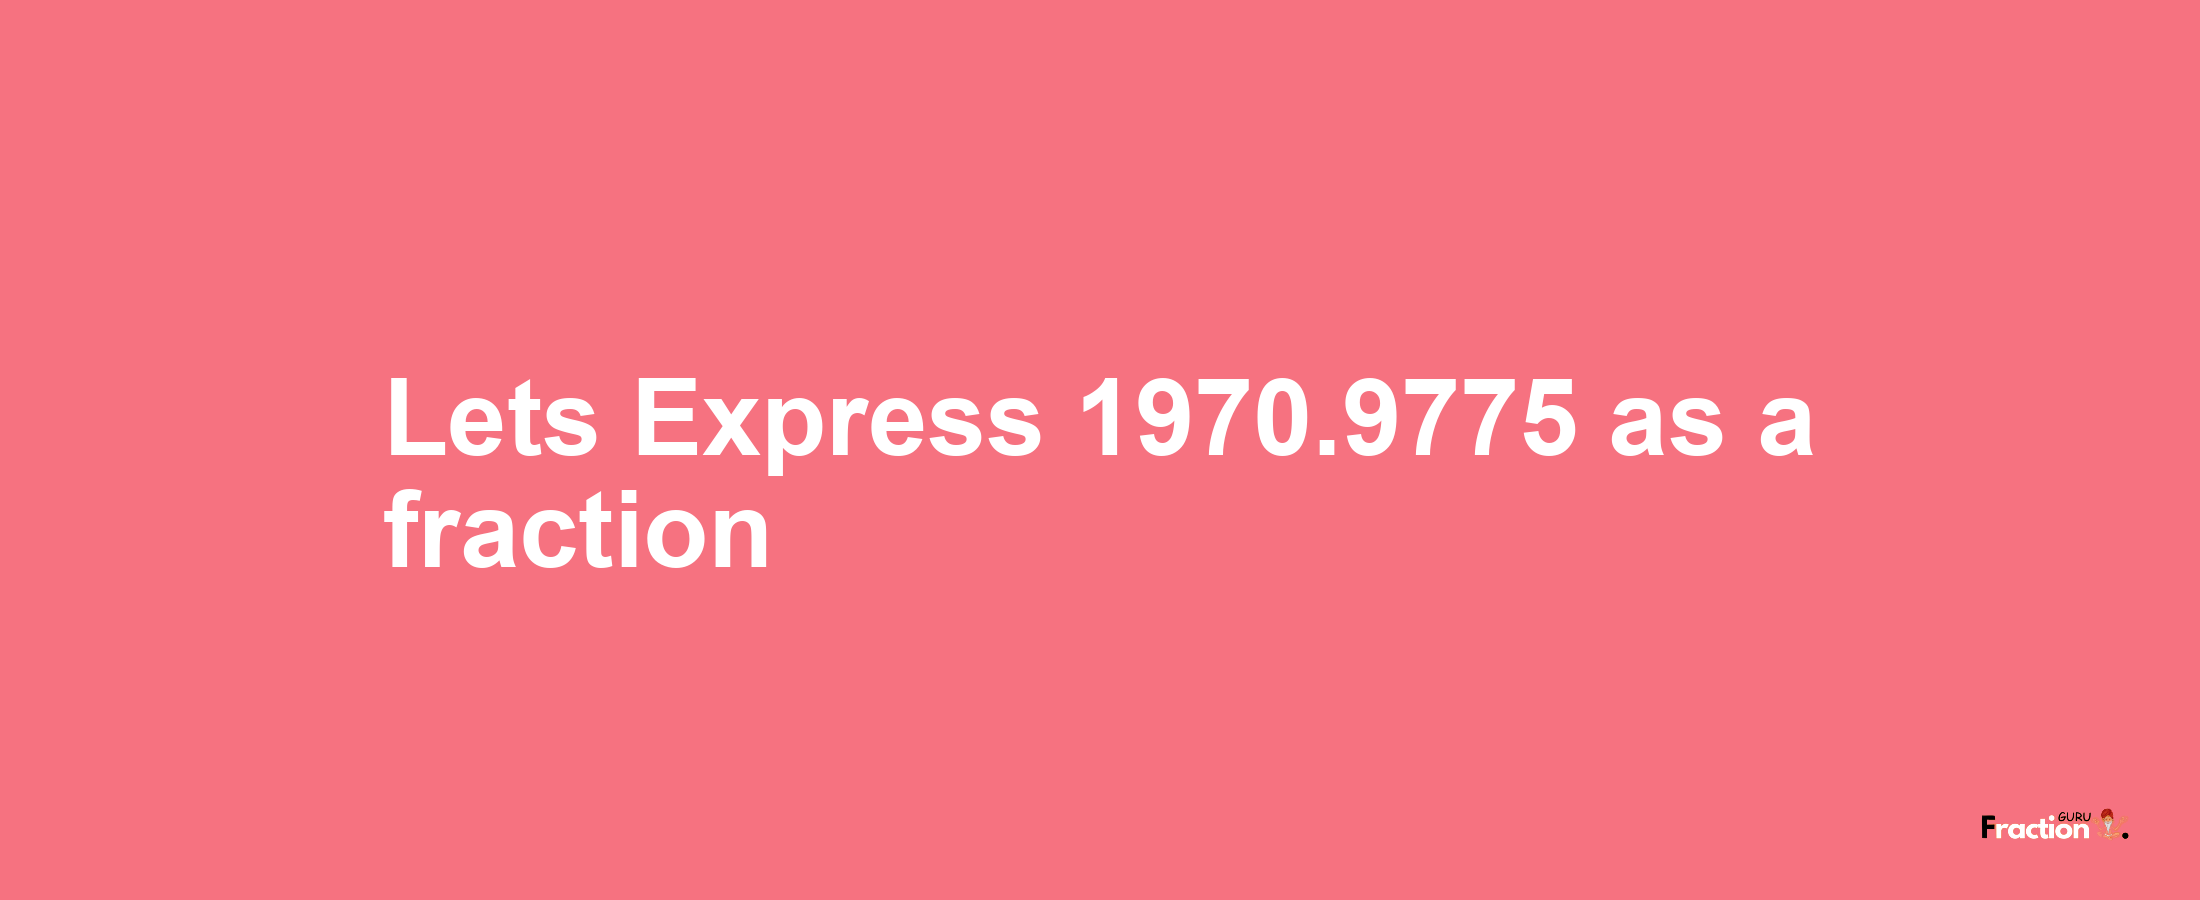 Lets Express 1970.9775 as afraction